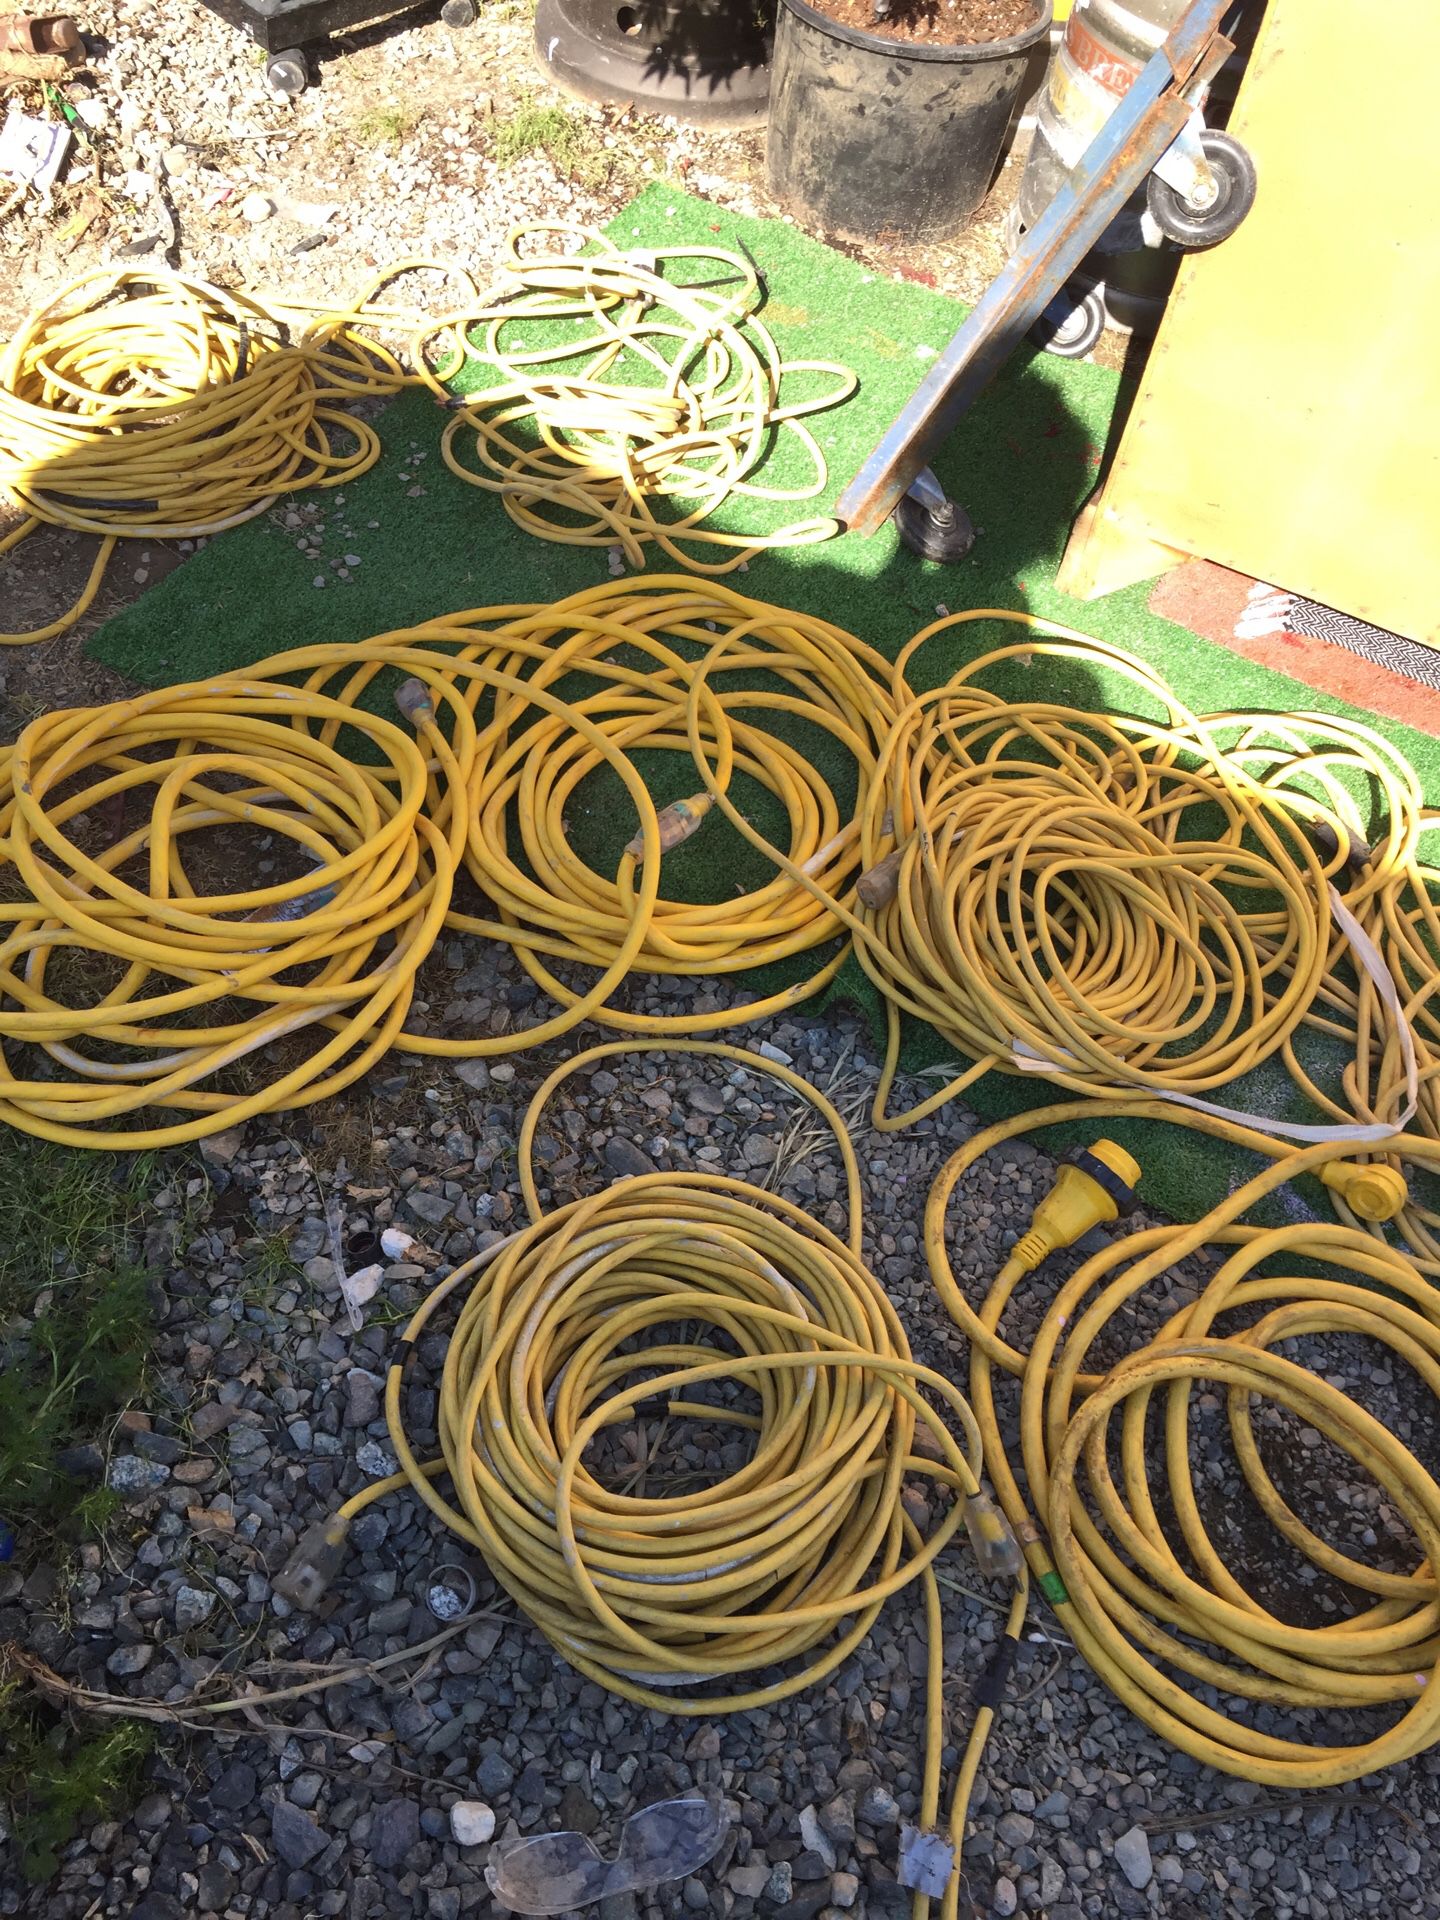 So. Many. Extension. Cords. Final Offer $100 for all, worth over $400 at least!